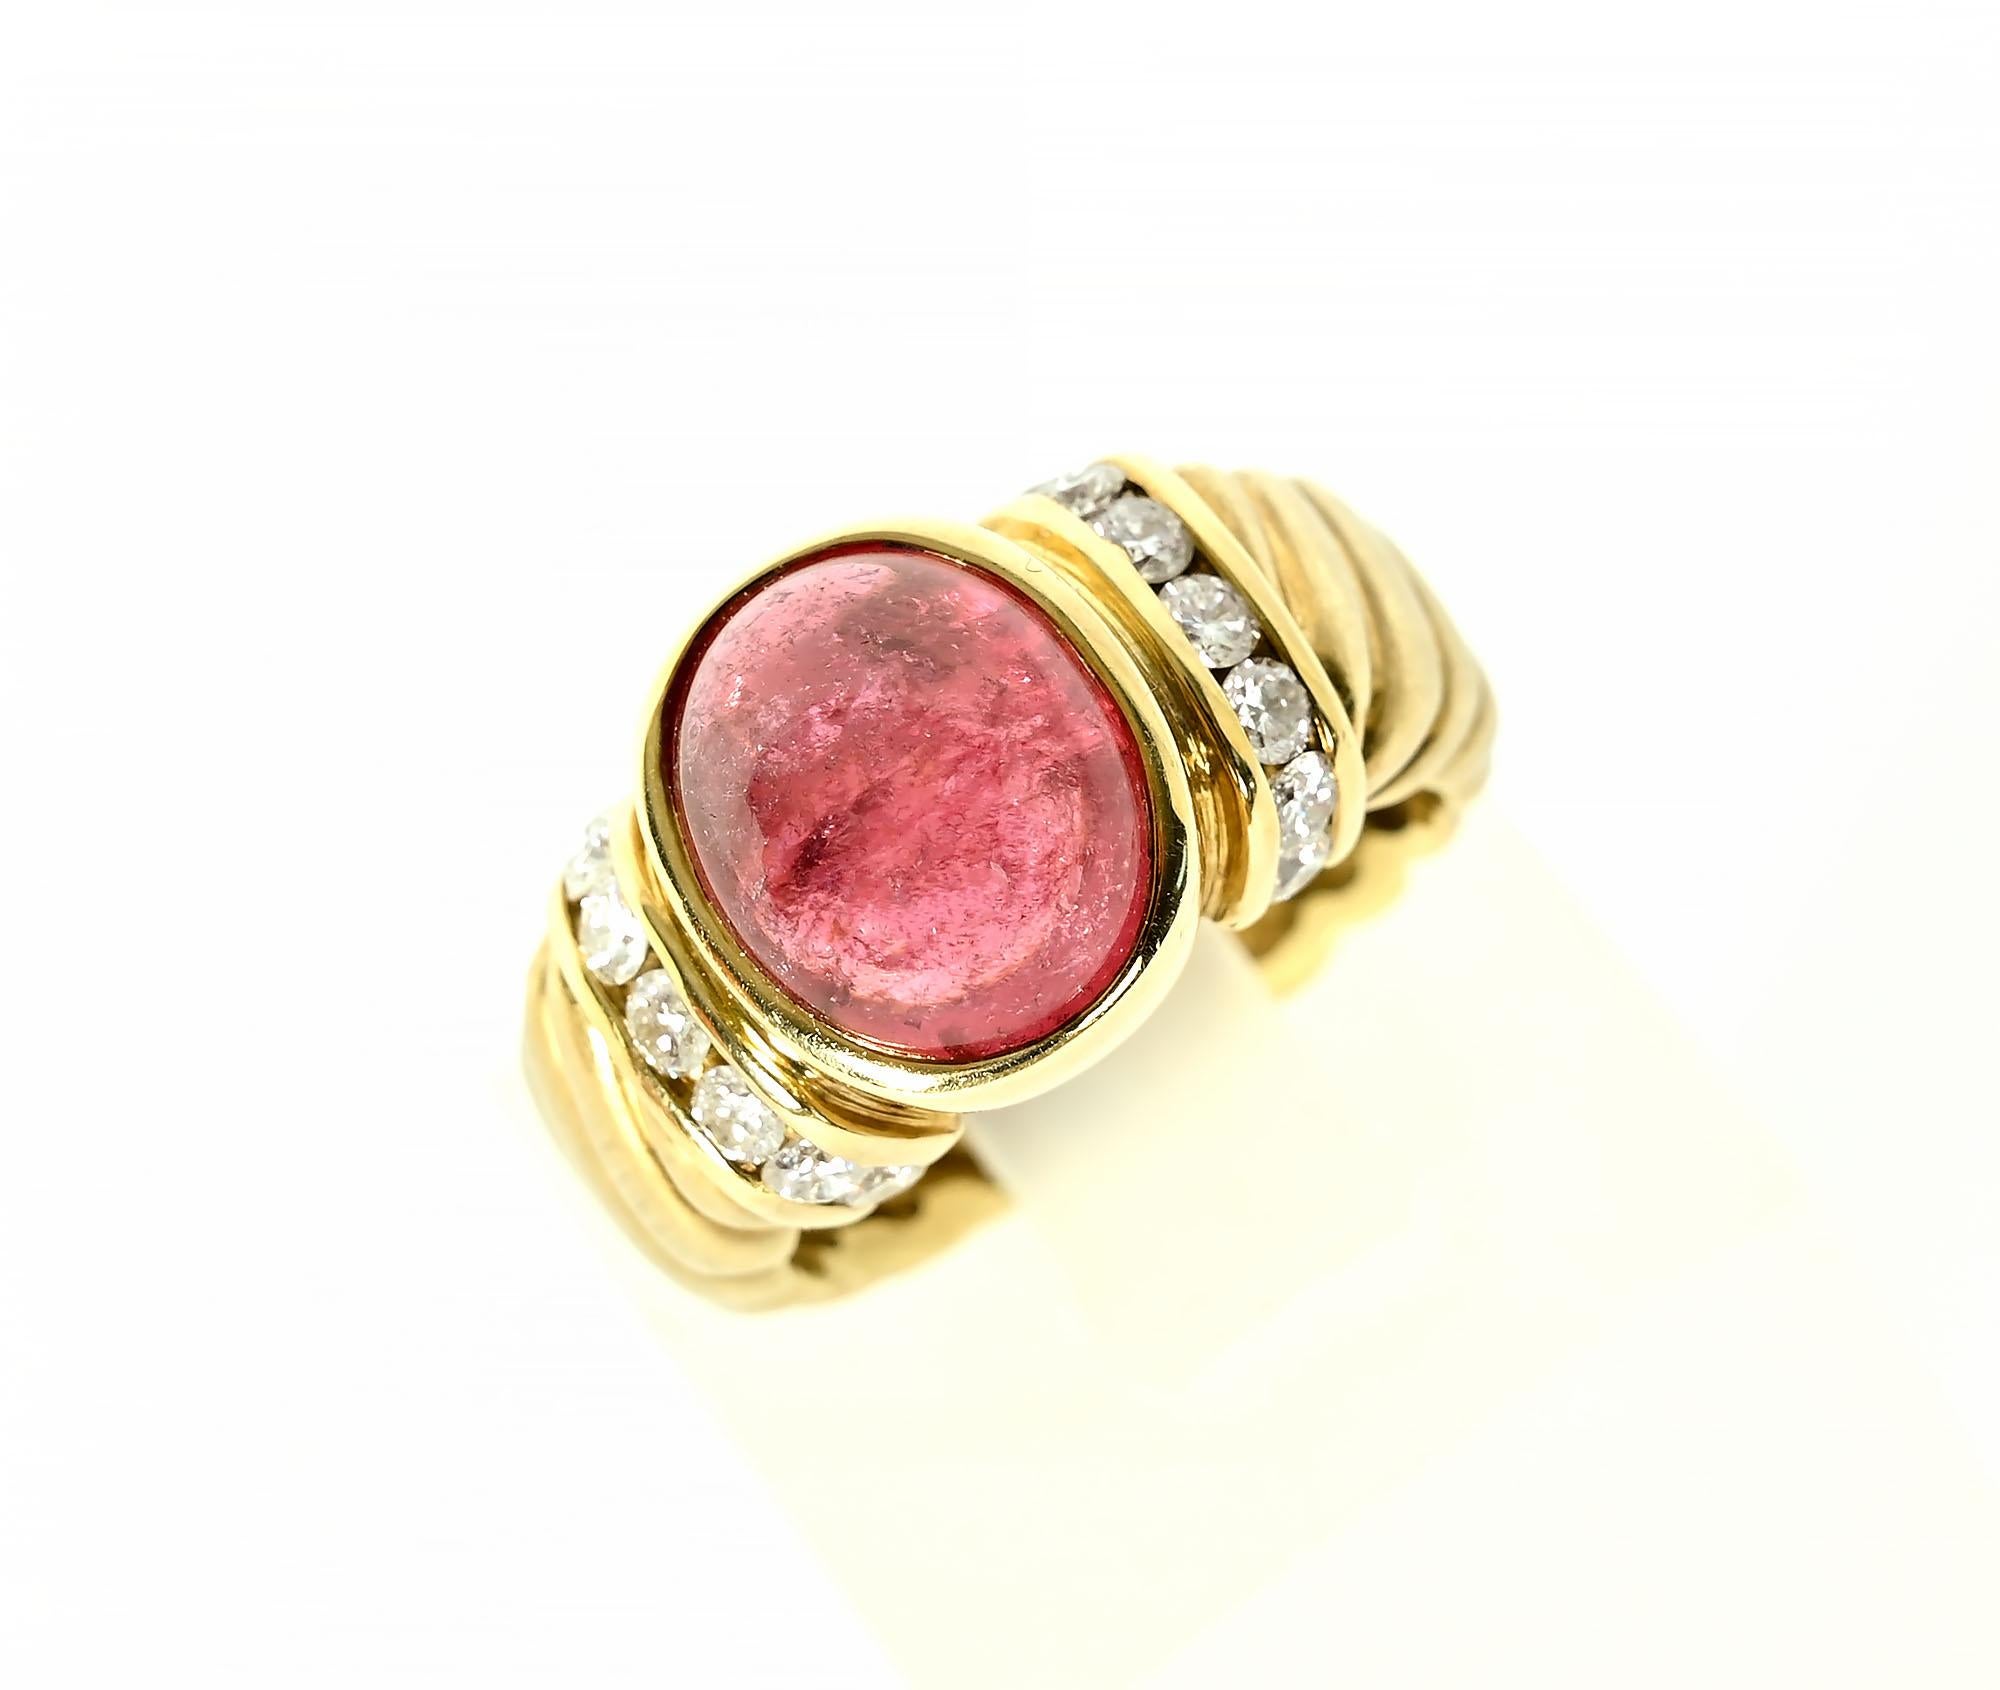 Simple but dressy tourmaline and diamond 14 karat gold ring by Aletto Brothers. The central oval tourmaline measures 1/2